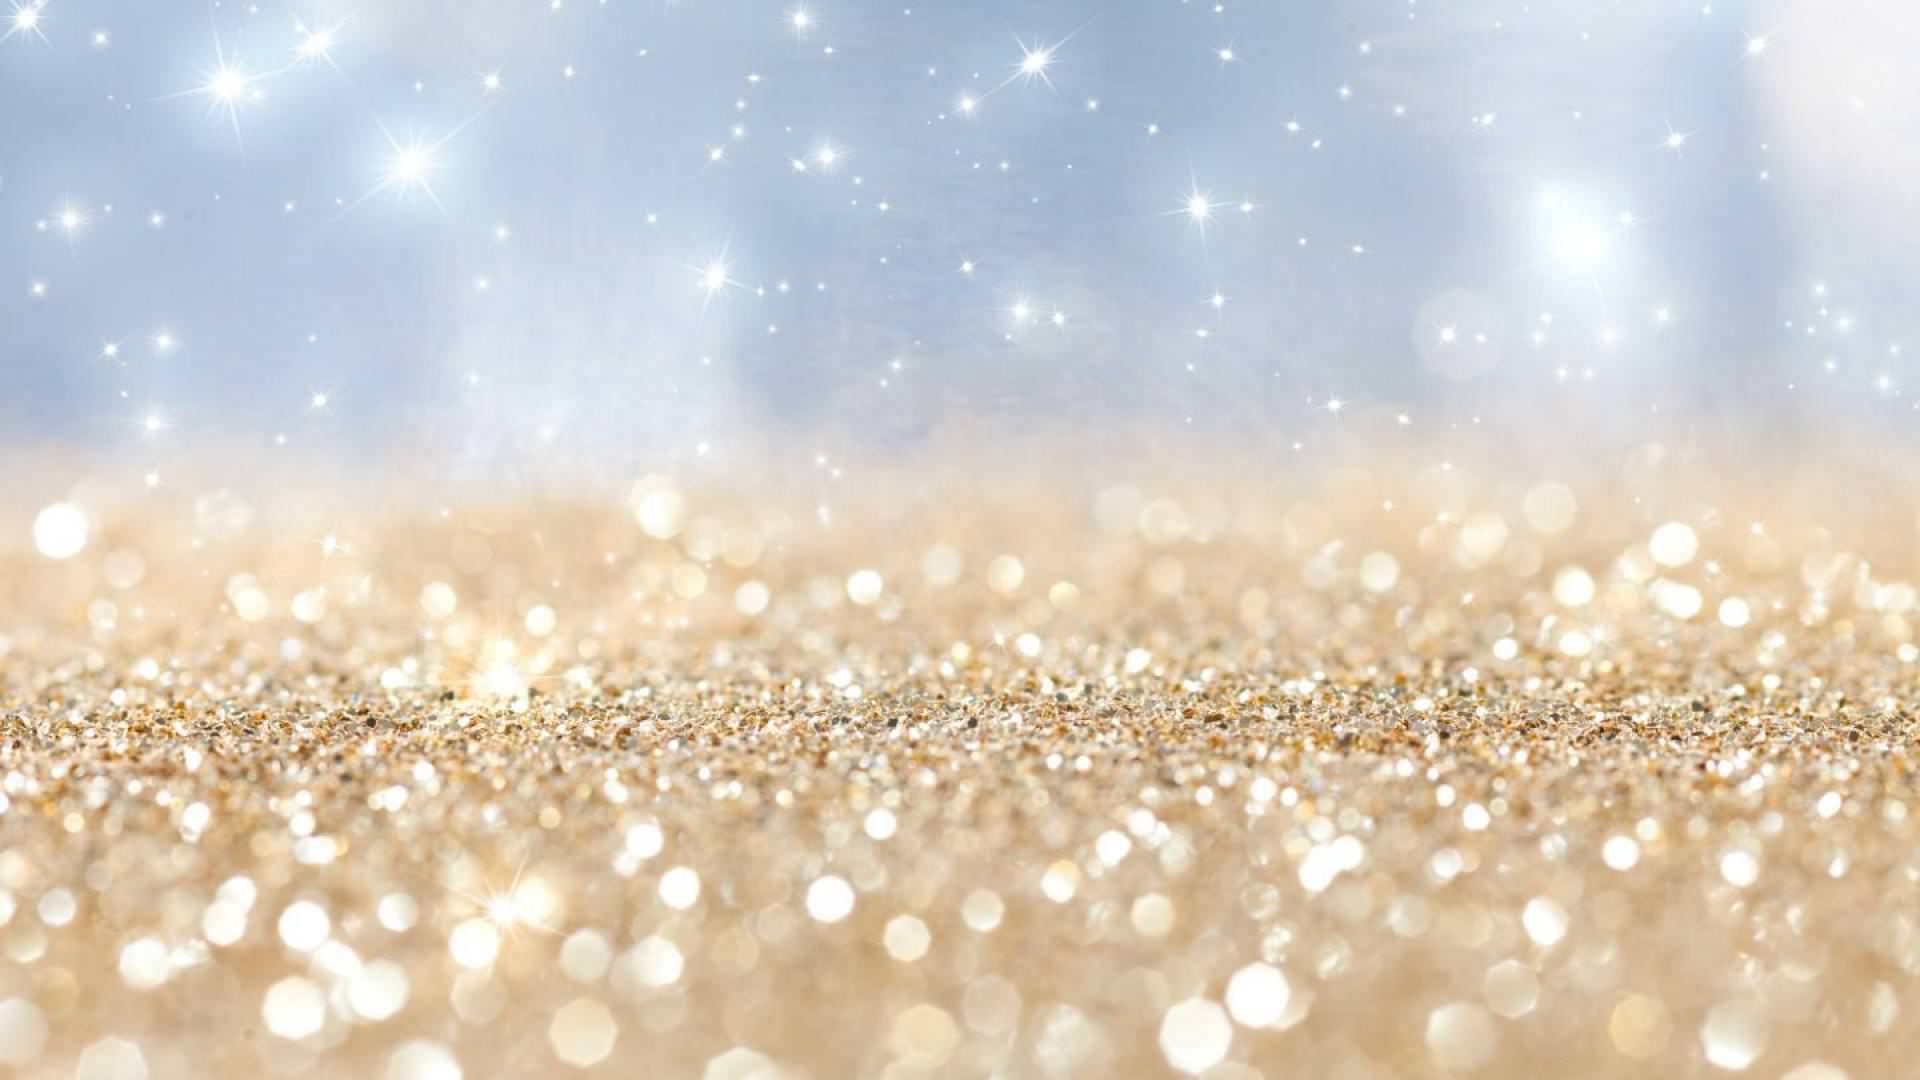 sparkles background 10. Background Check All